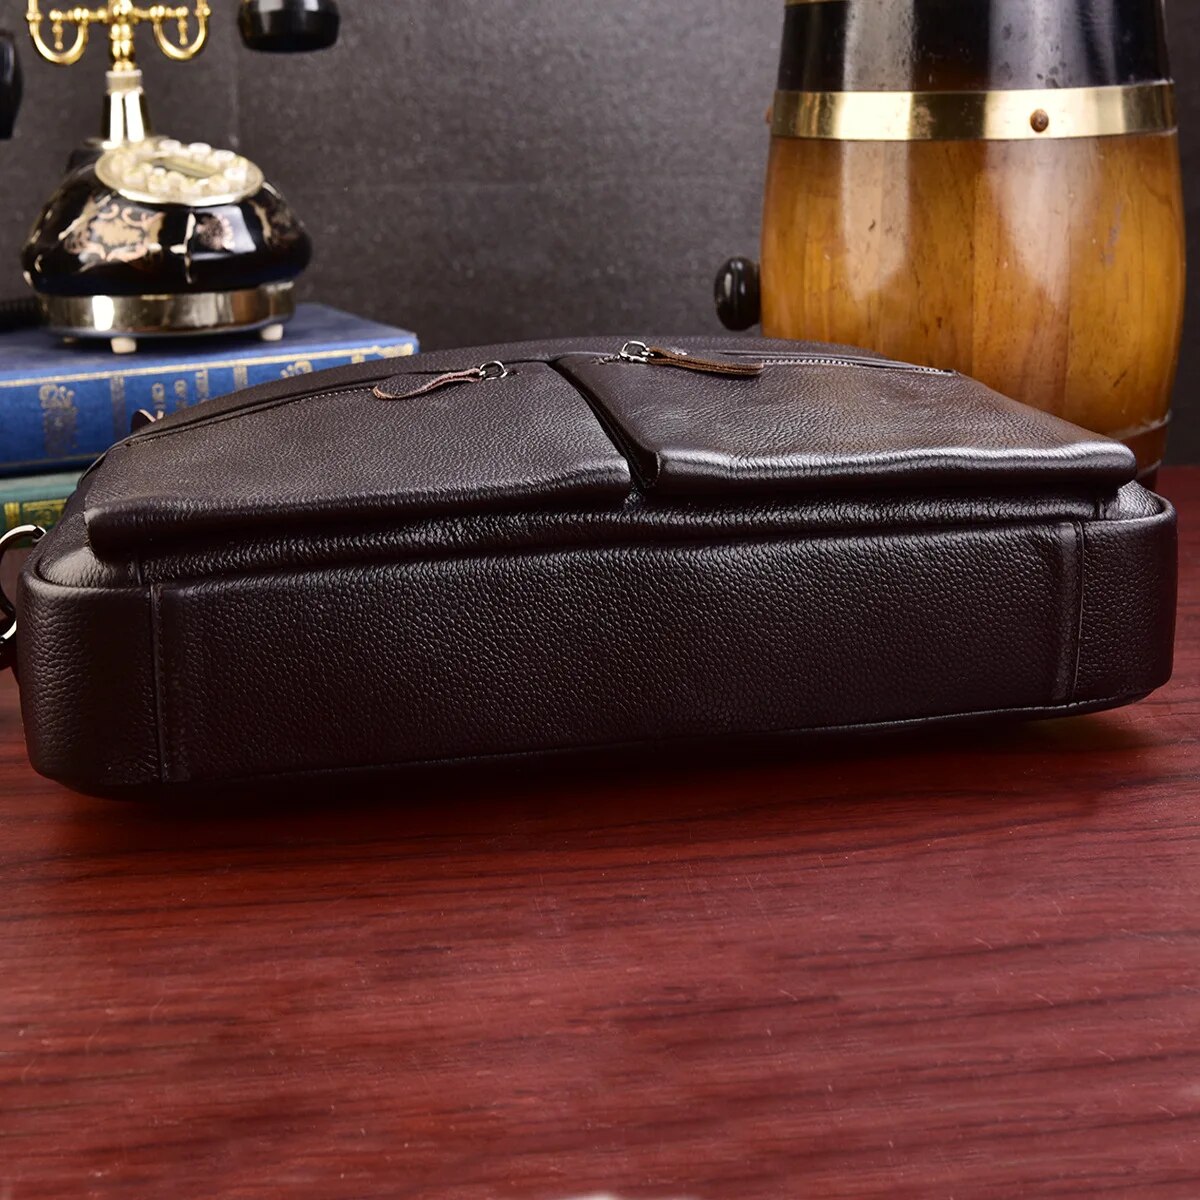 come4buy.com-Business Briefcases Men Cowhide Leather Fit 14'' லேப்டாப் பேக்